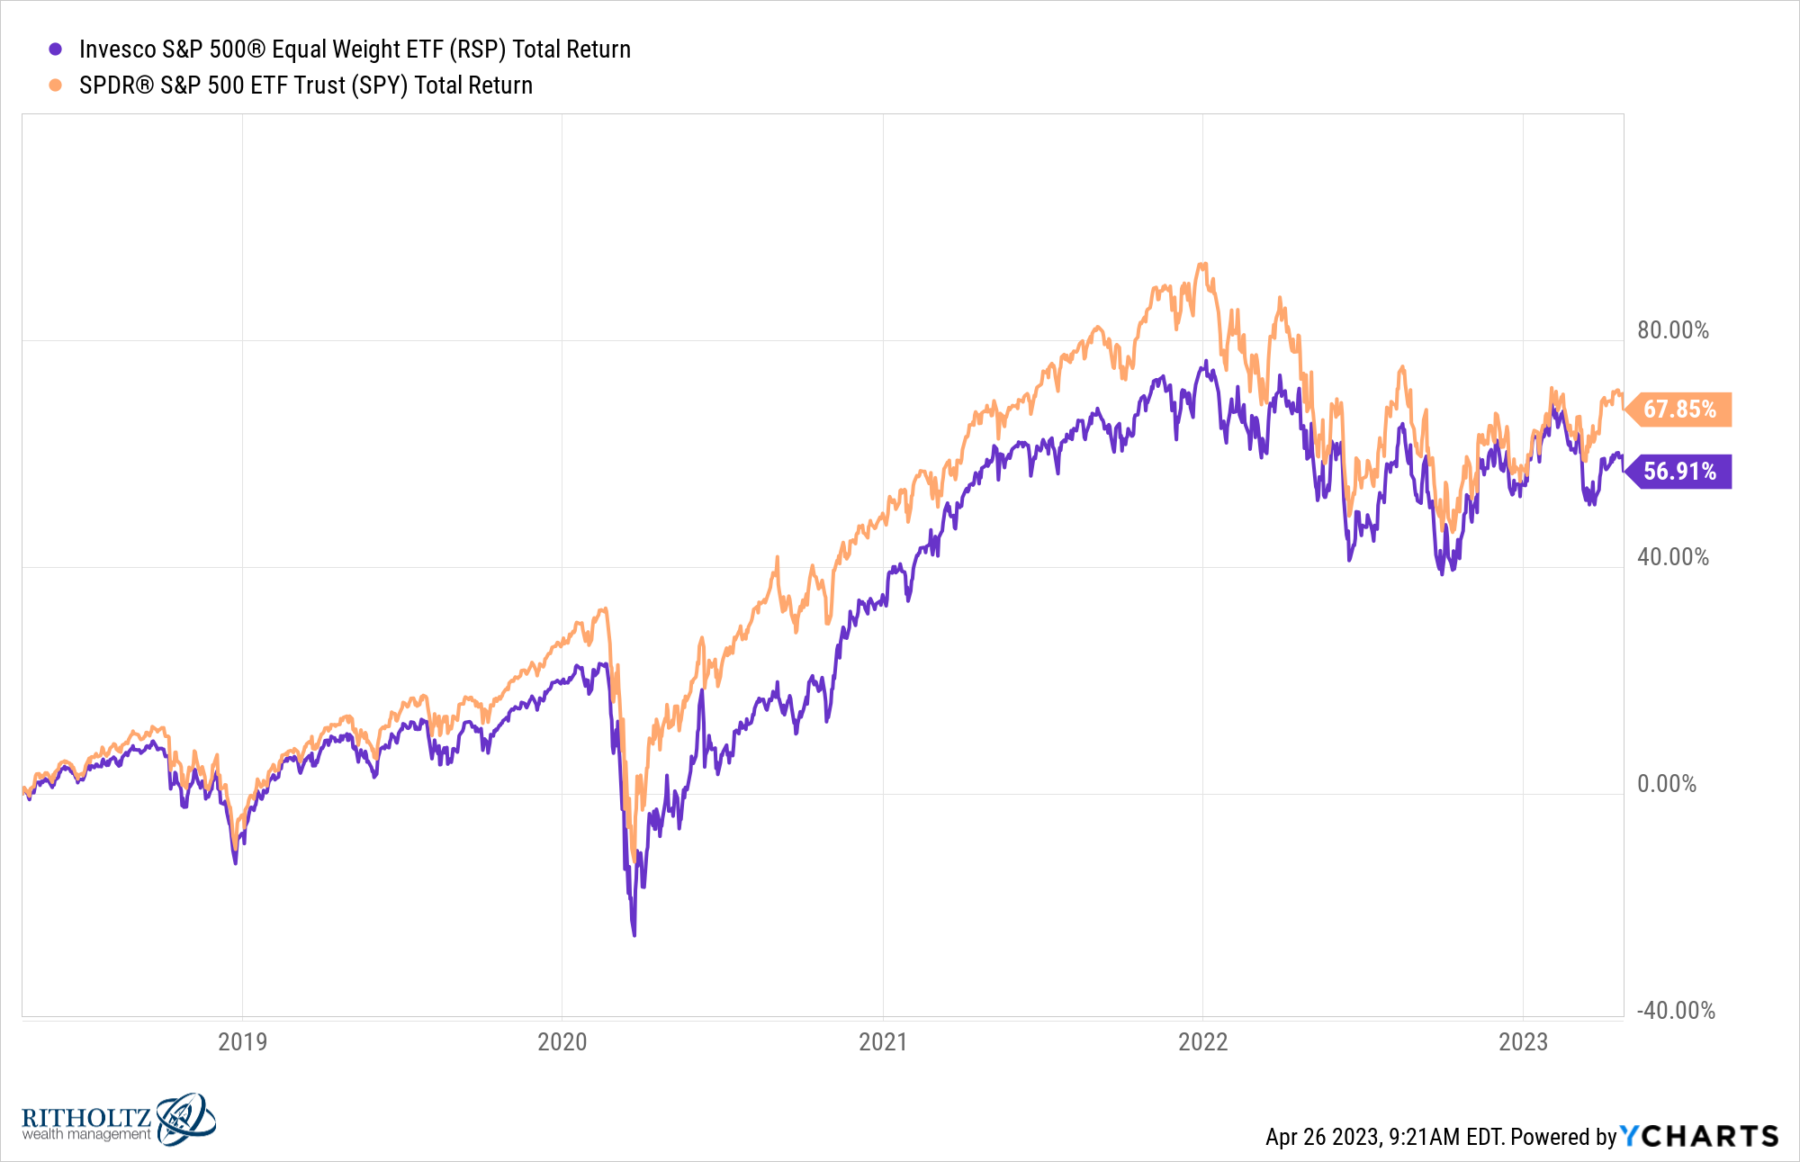 What Does the Relative Performance of Equal Weight S&P500 Mean? 7